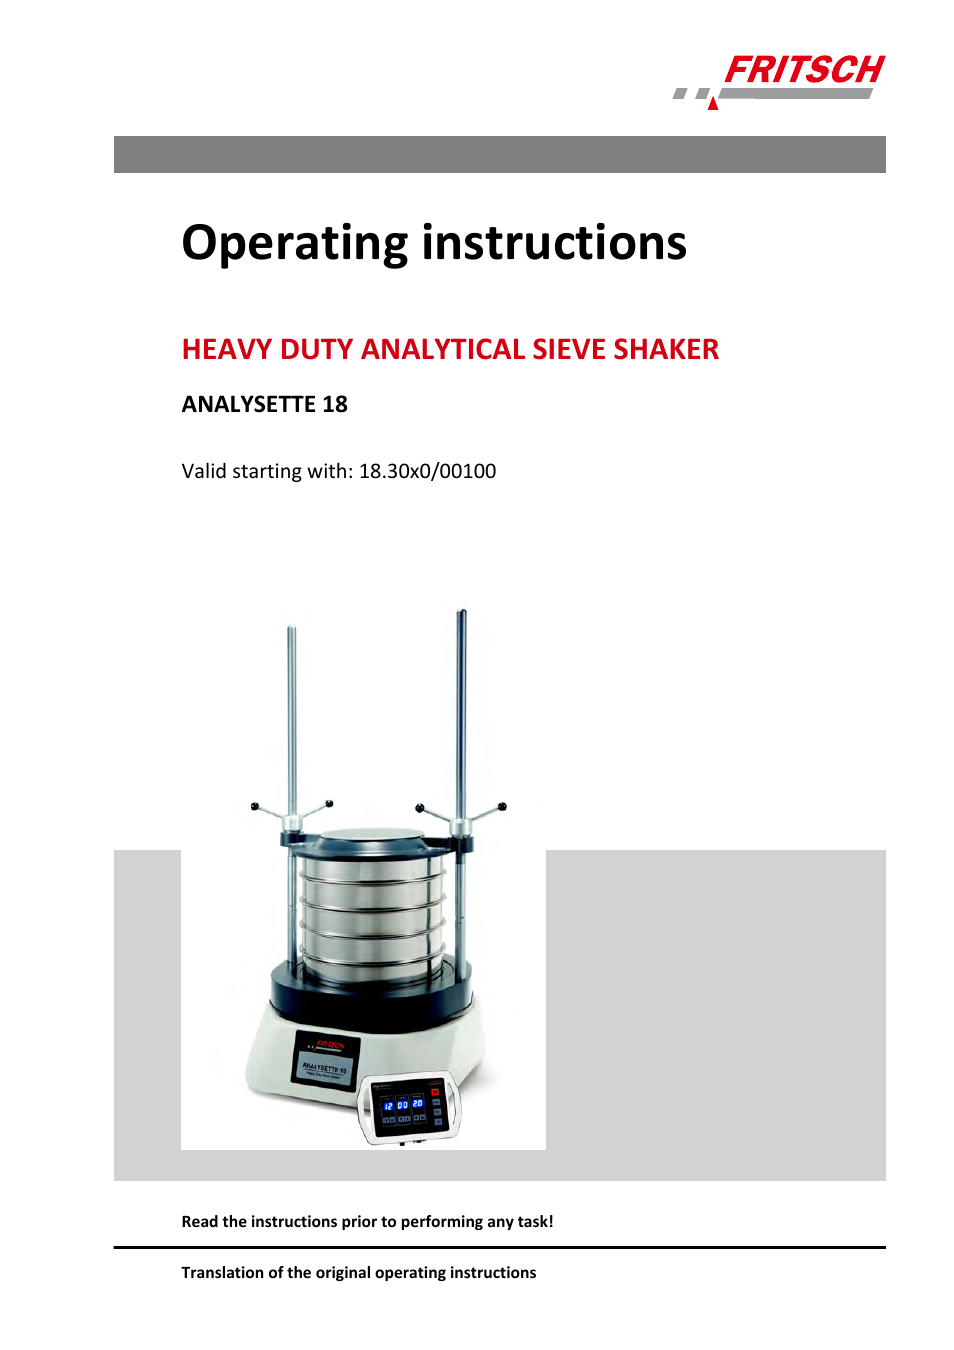 FRITSCH ANALYSETTE 18 User Manual | 40 pages